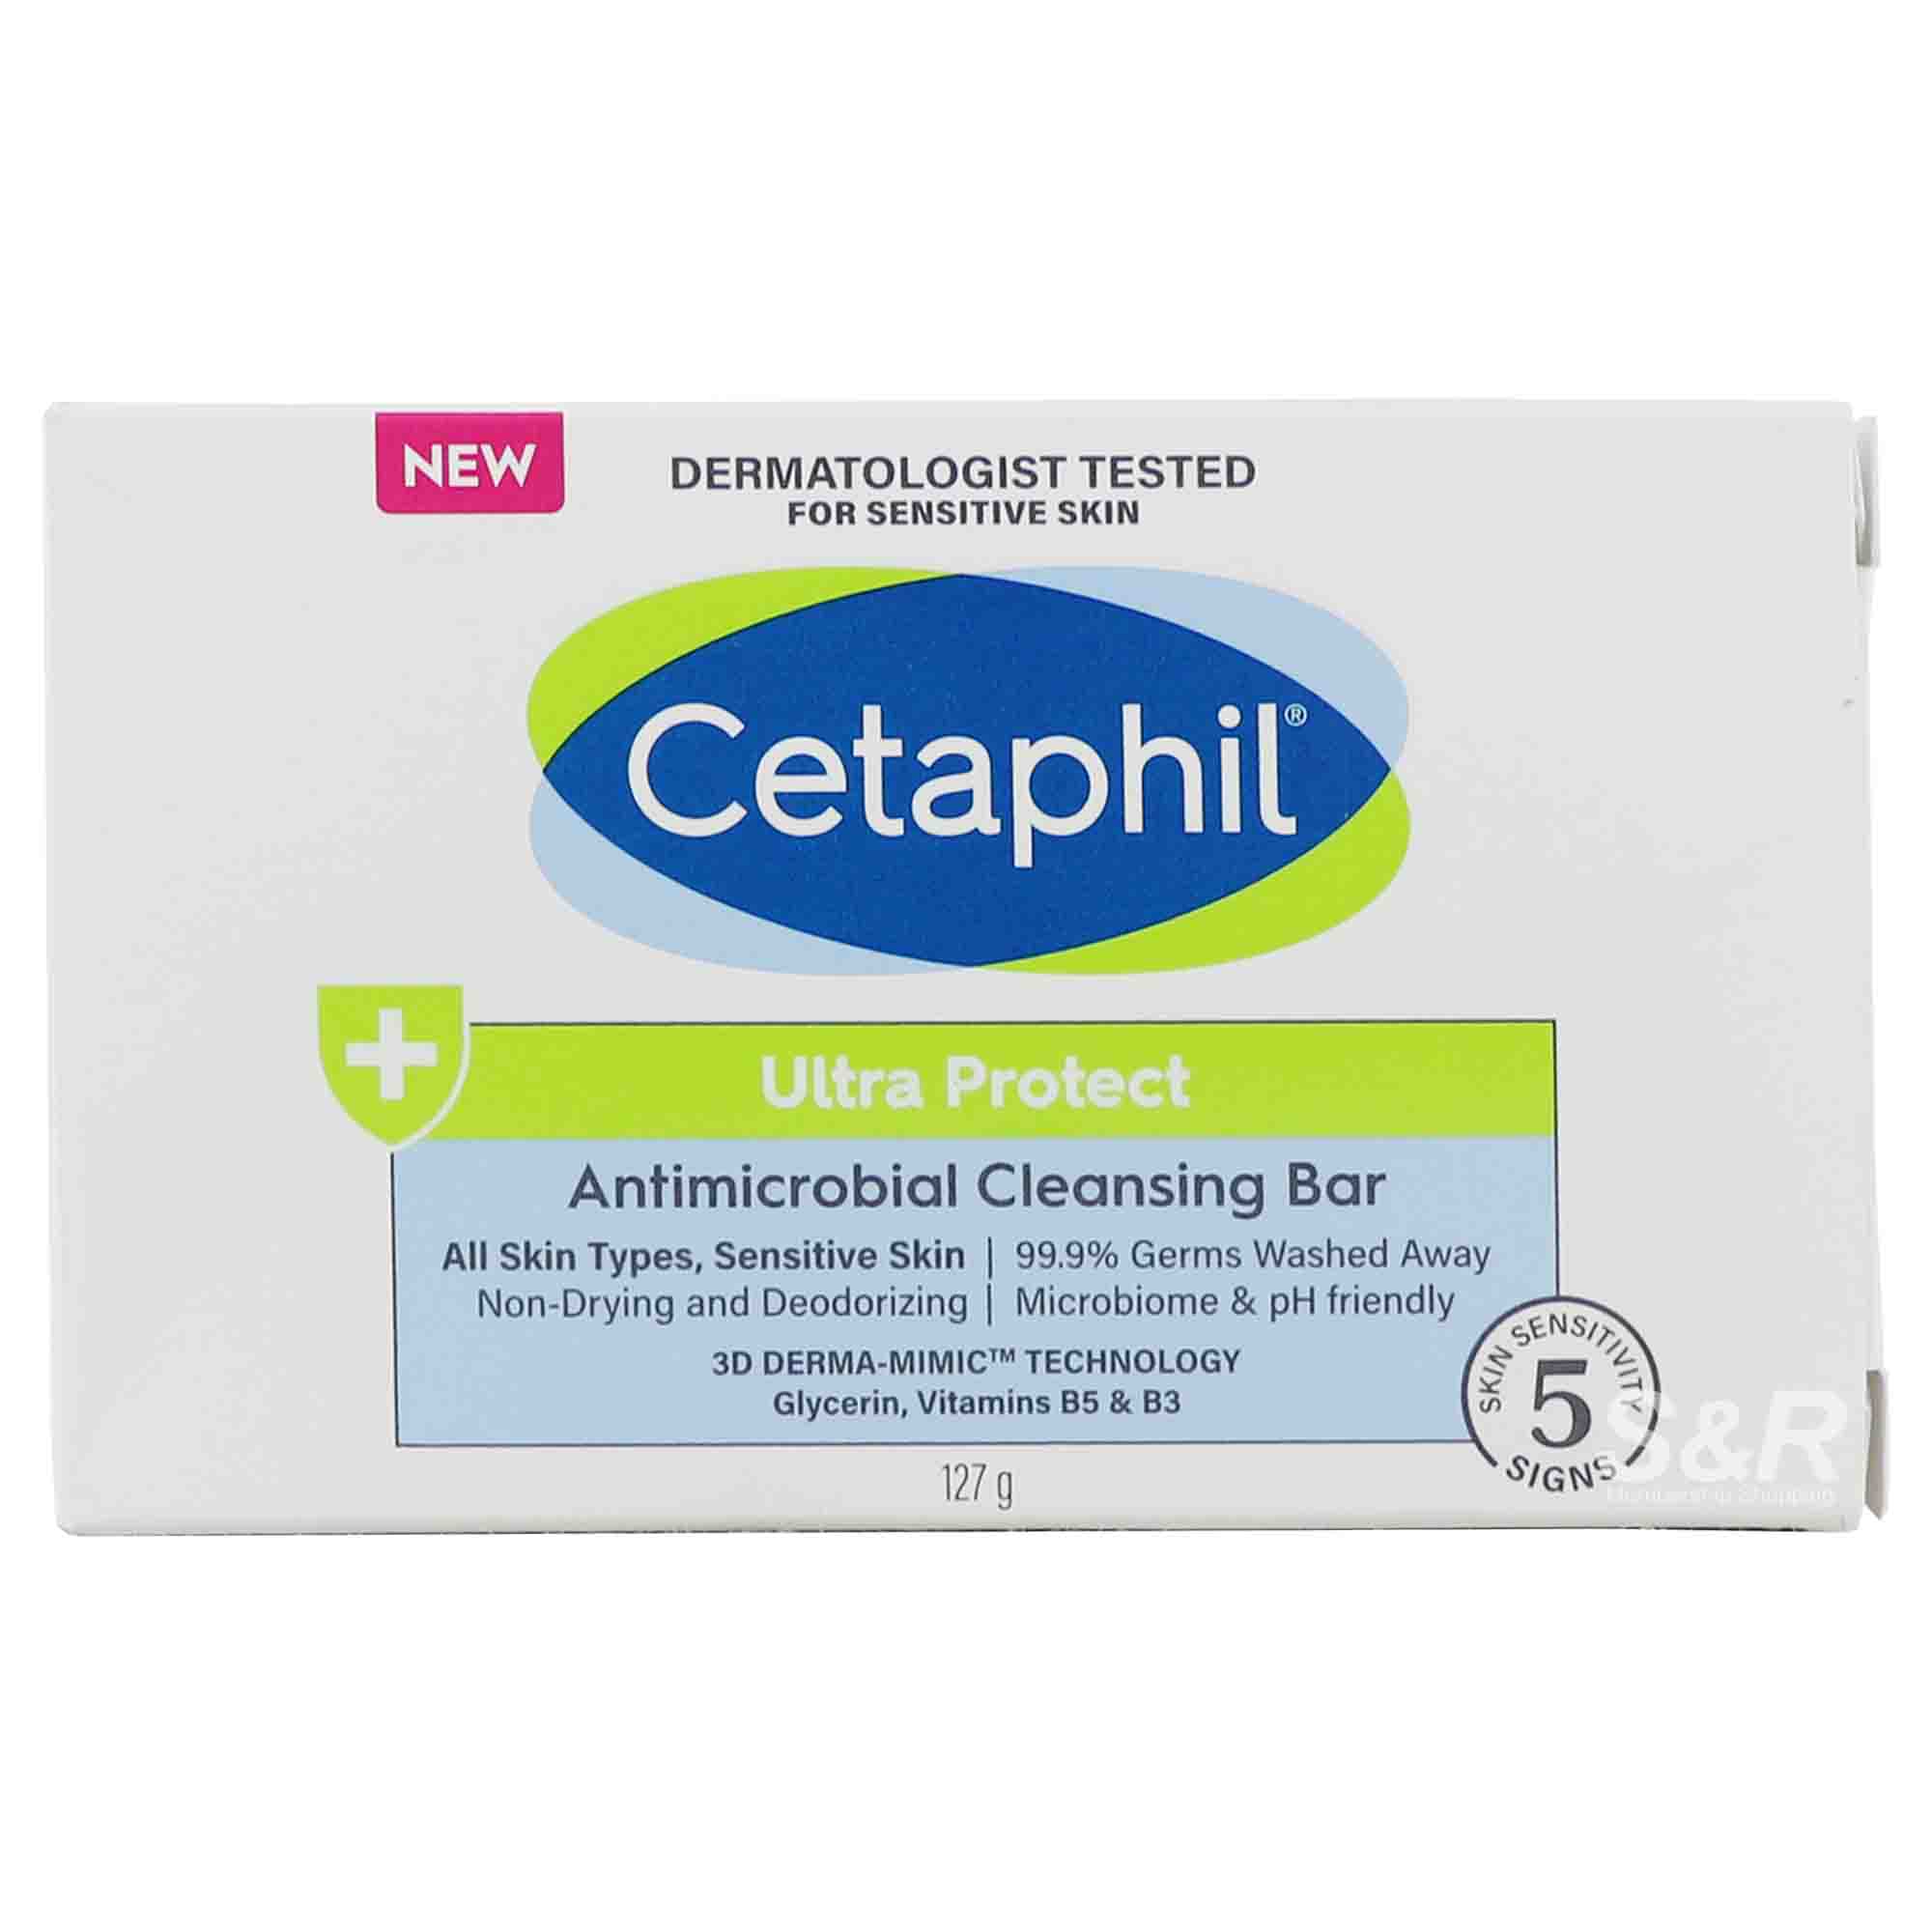 Cetaphil Ultra Protect Antimicrobial Cleansing Bar 127g